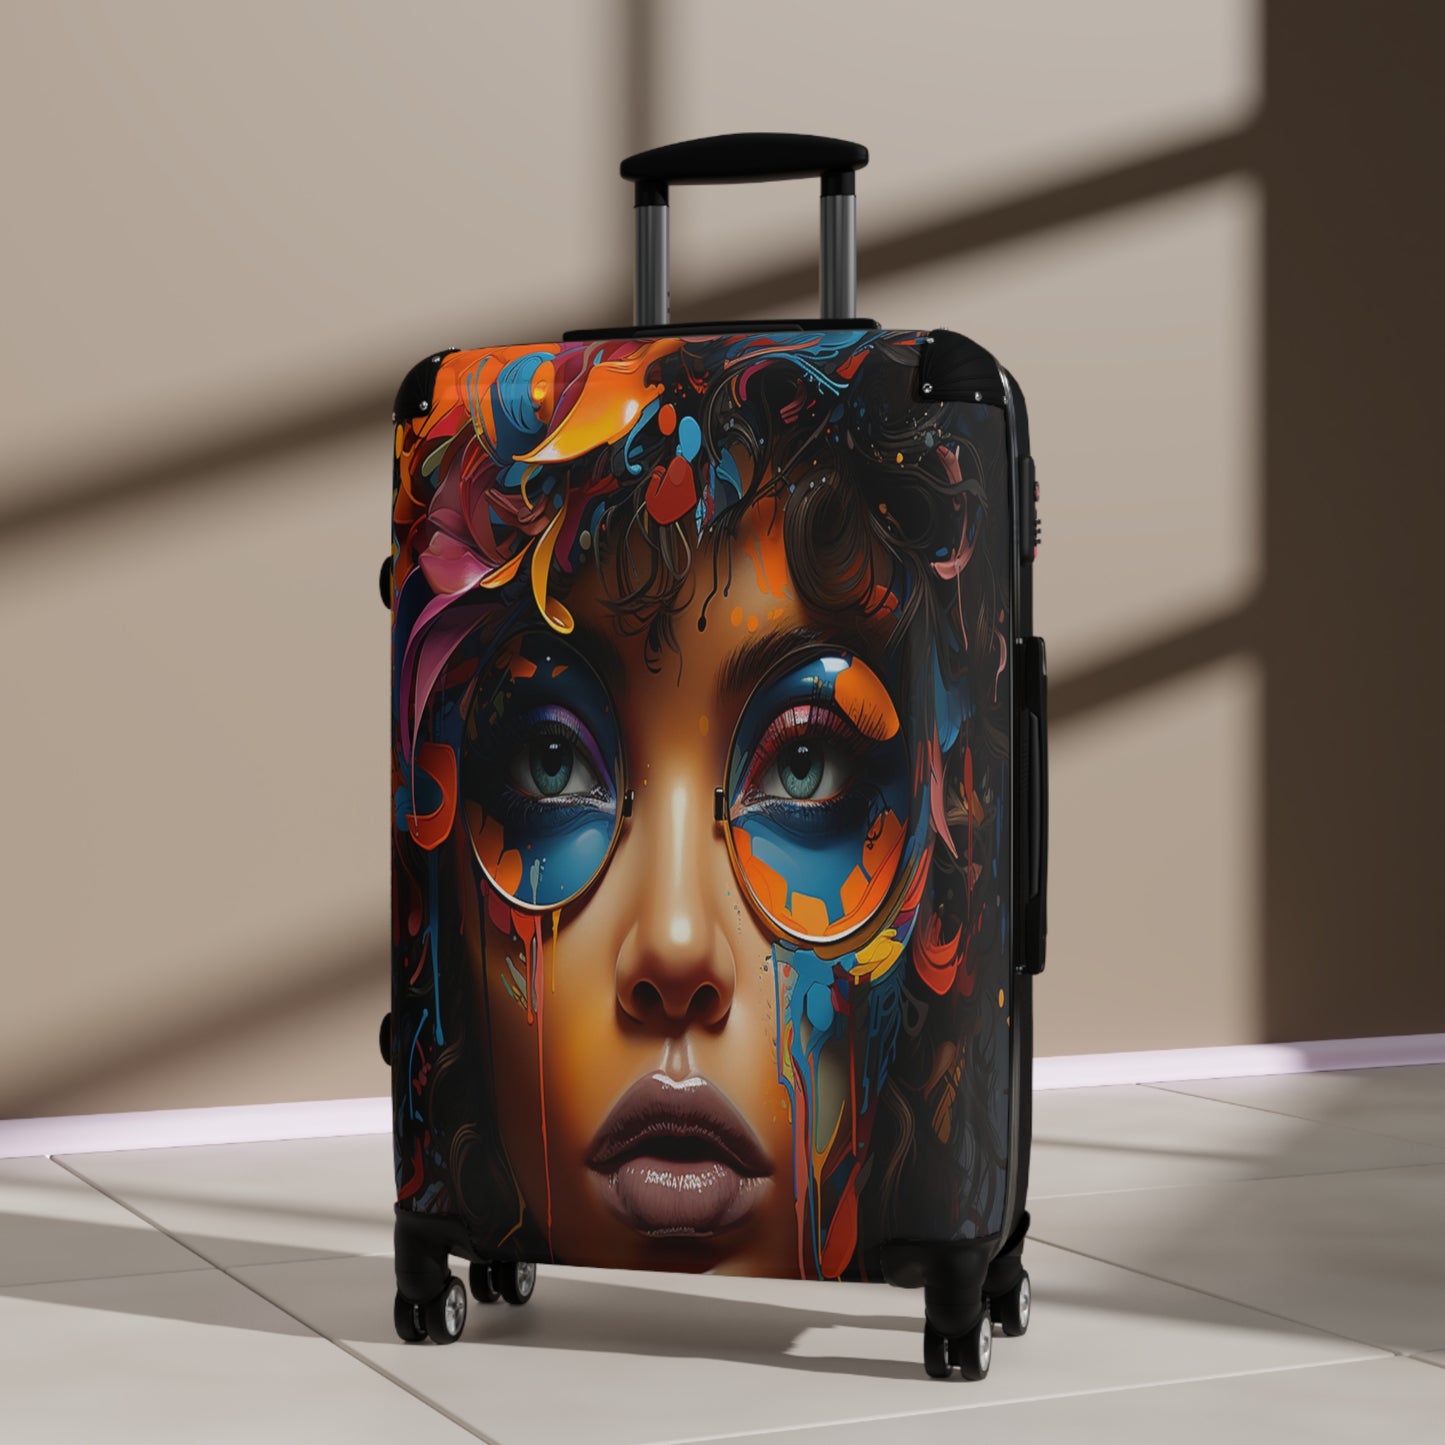 Artistic Odyssey Luggage | Hippie Trip Collection | Christmas vacation | Travel Luggage | Suitcase | Boho | Retro